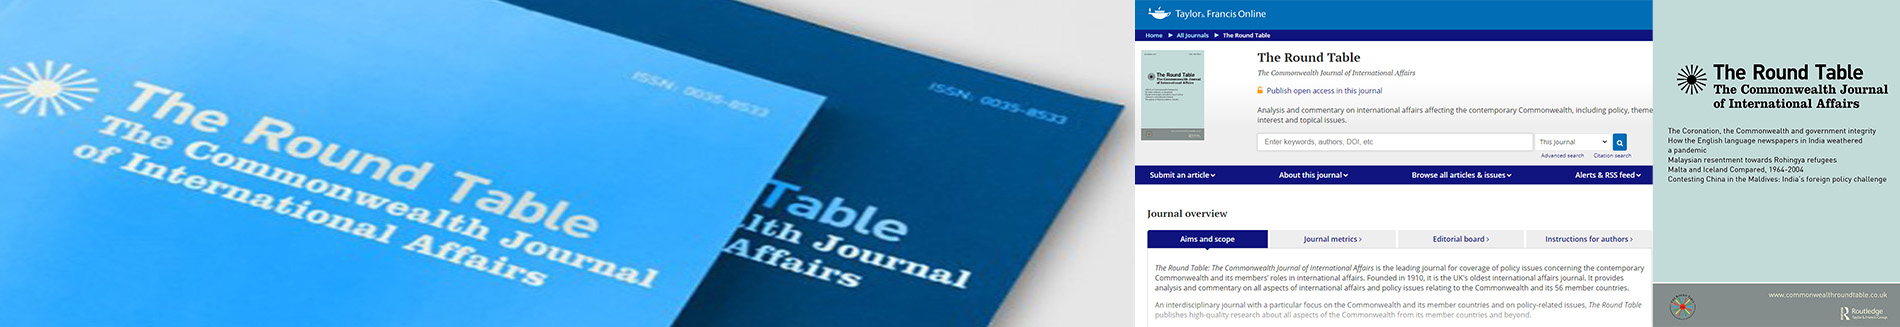 New editor position at the Round Table Journal. picture shows journal covers and Taylor & Francis website